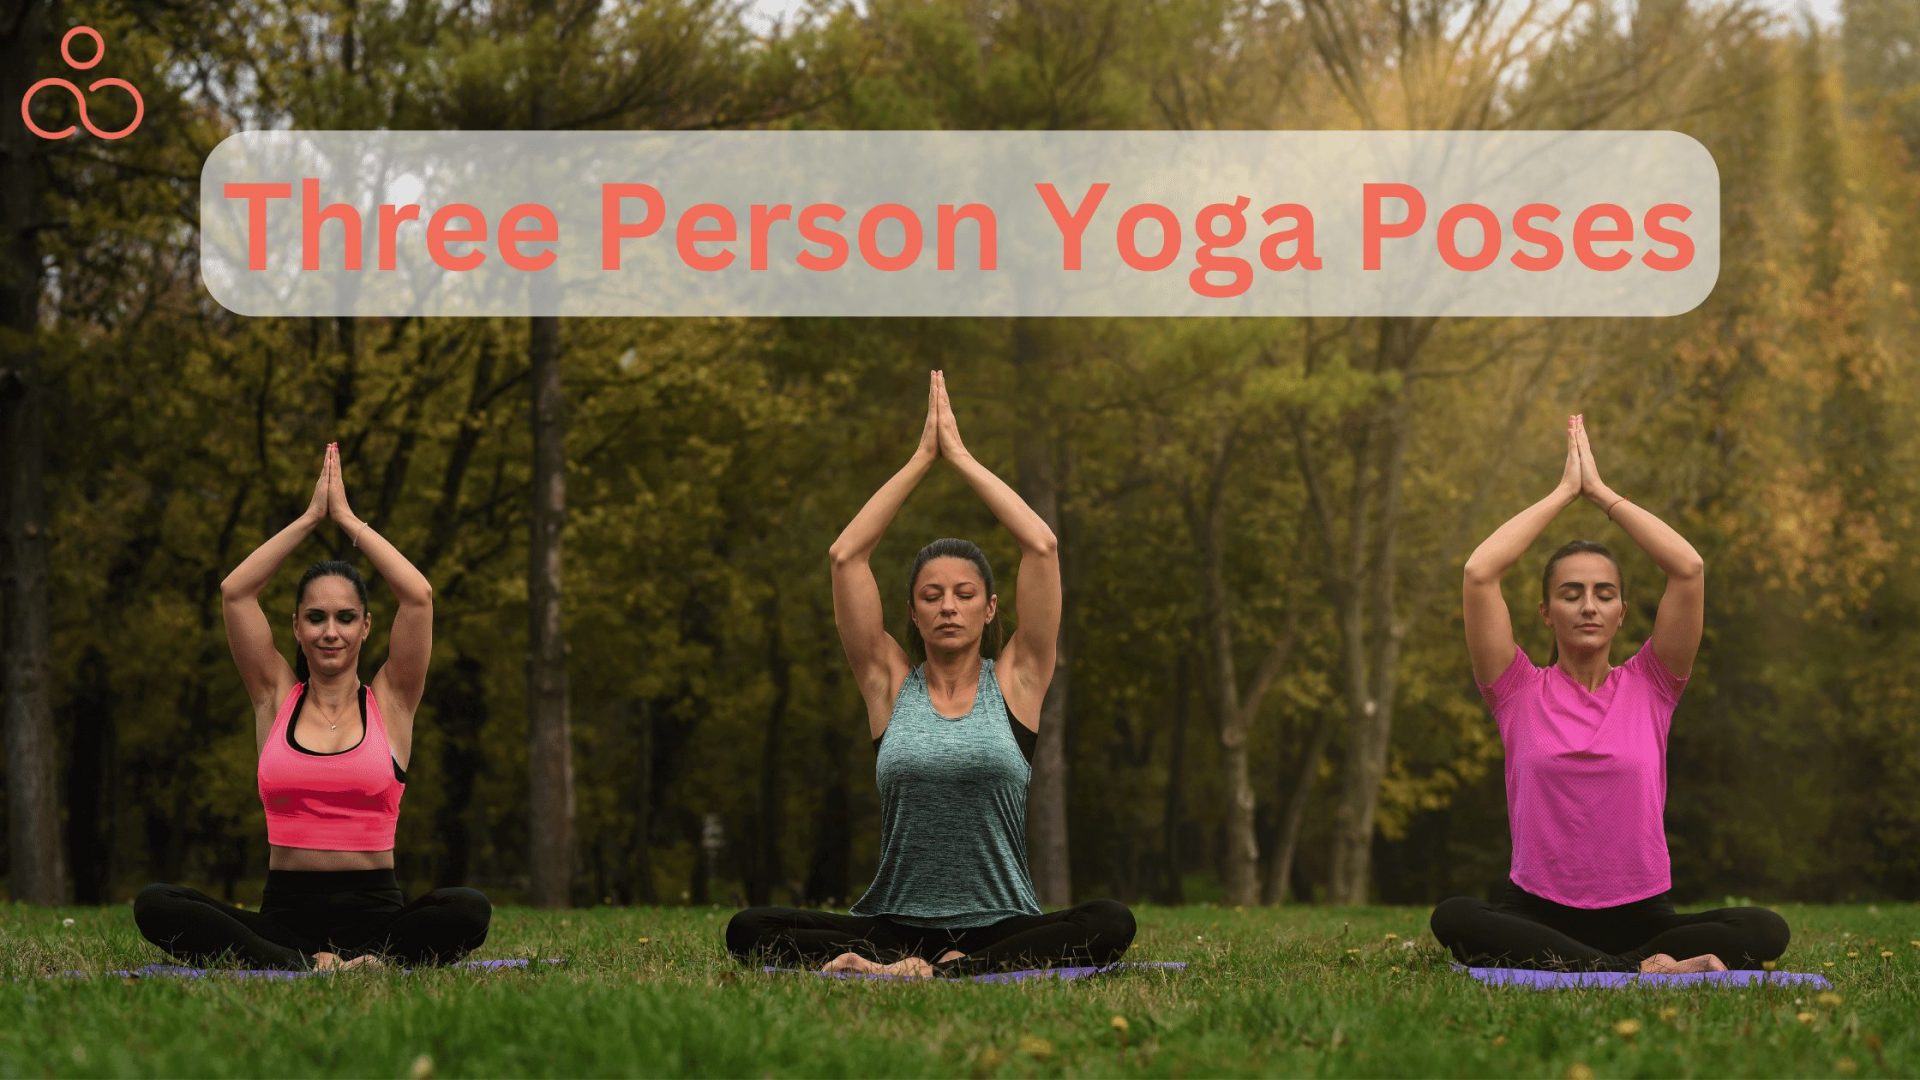 4 Yoga Poses to Strengthen Your Relationship